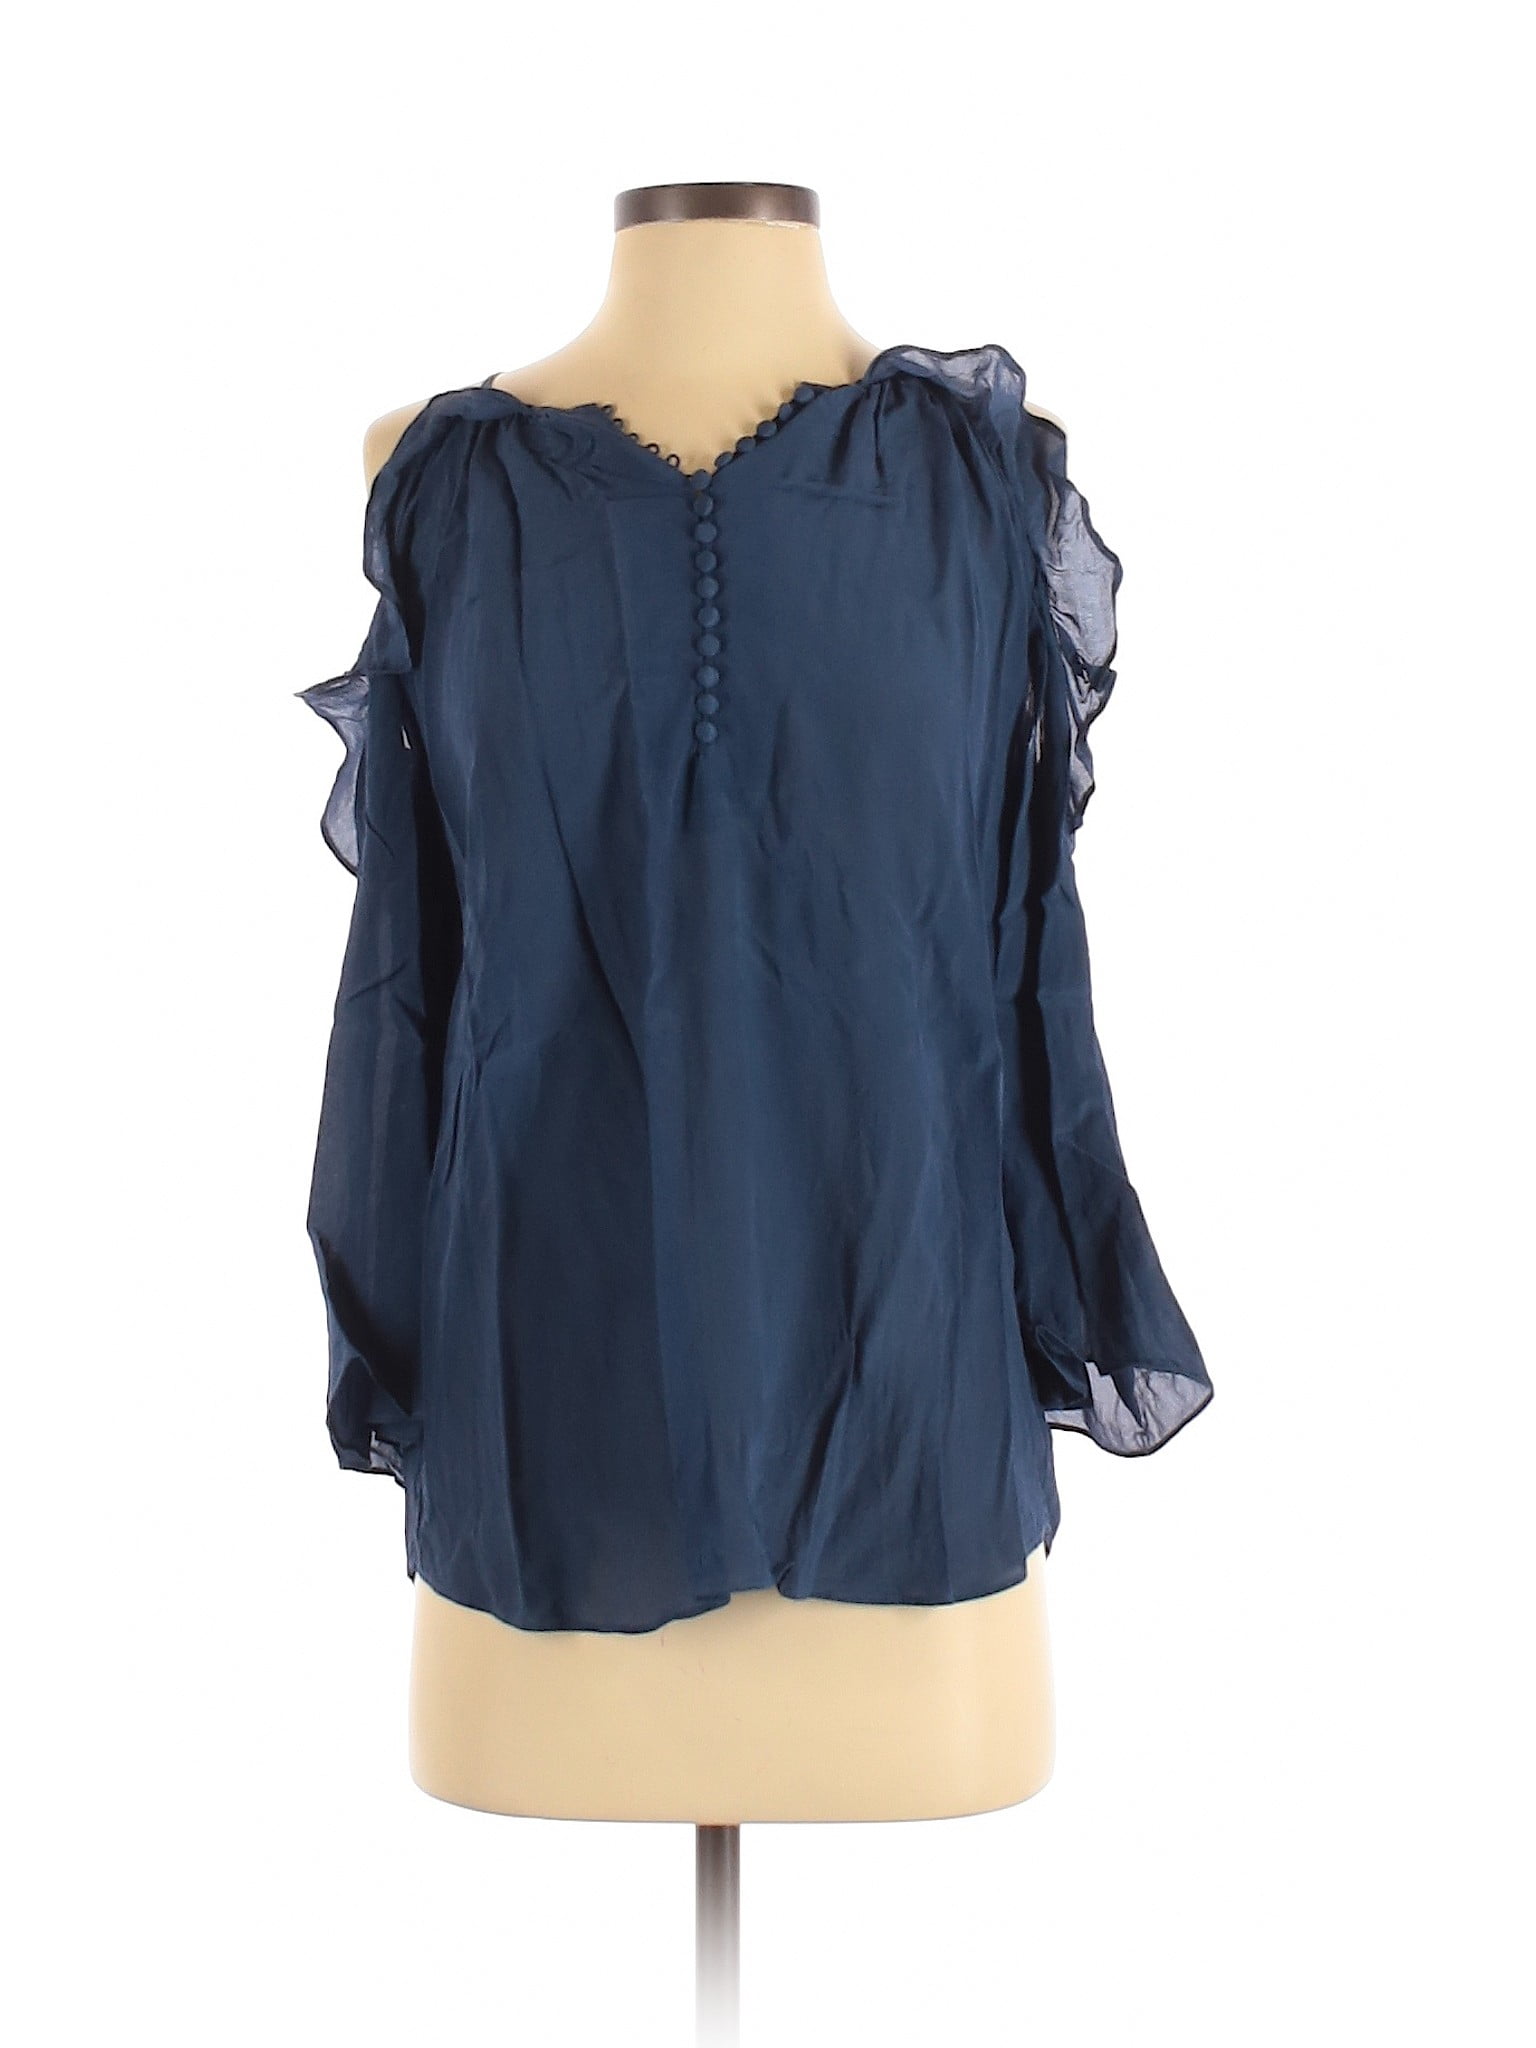 Black Label by Chico's - Pre-Owned Black Label by Chico's Women's Size ...